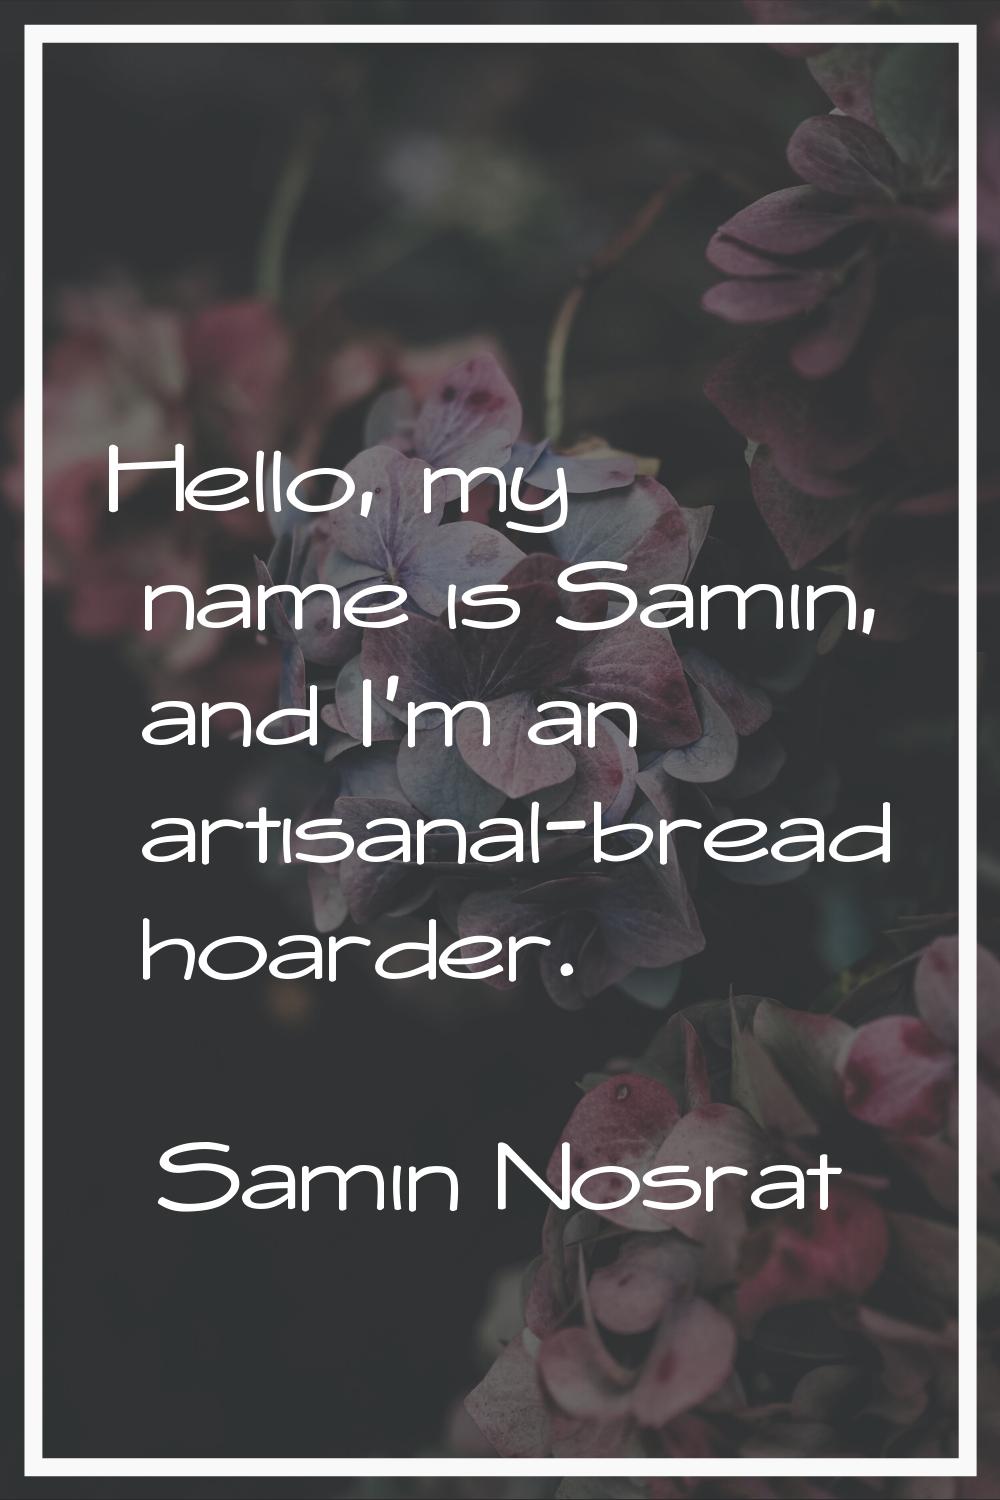 Hello, my name is Samin, and I'm an artisanal-bread hoarder.